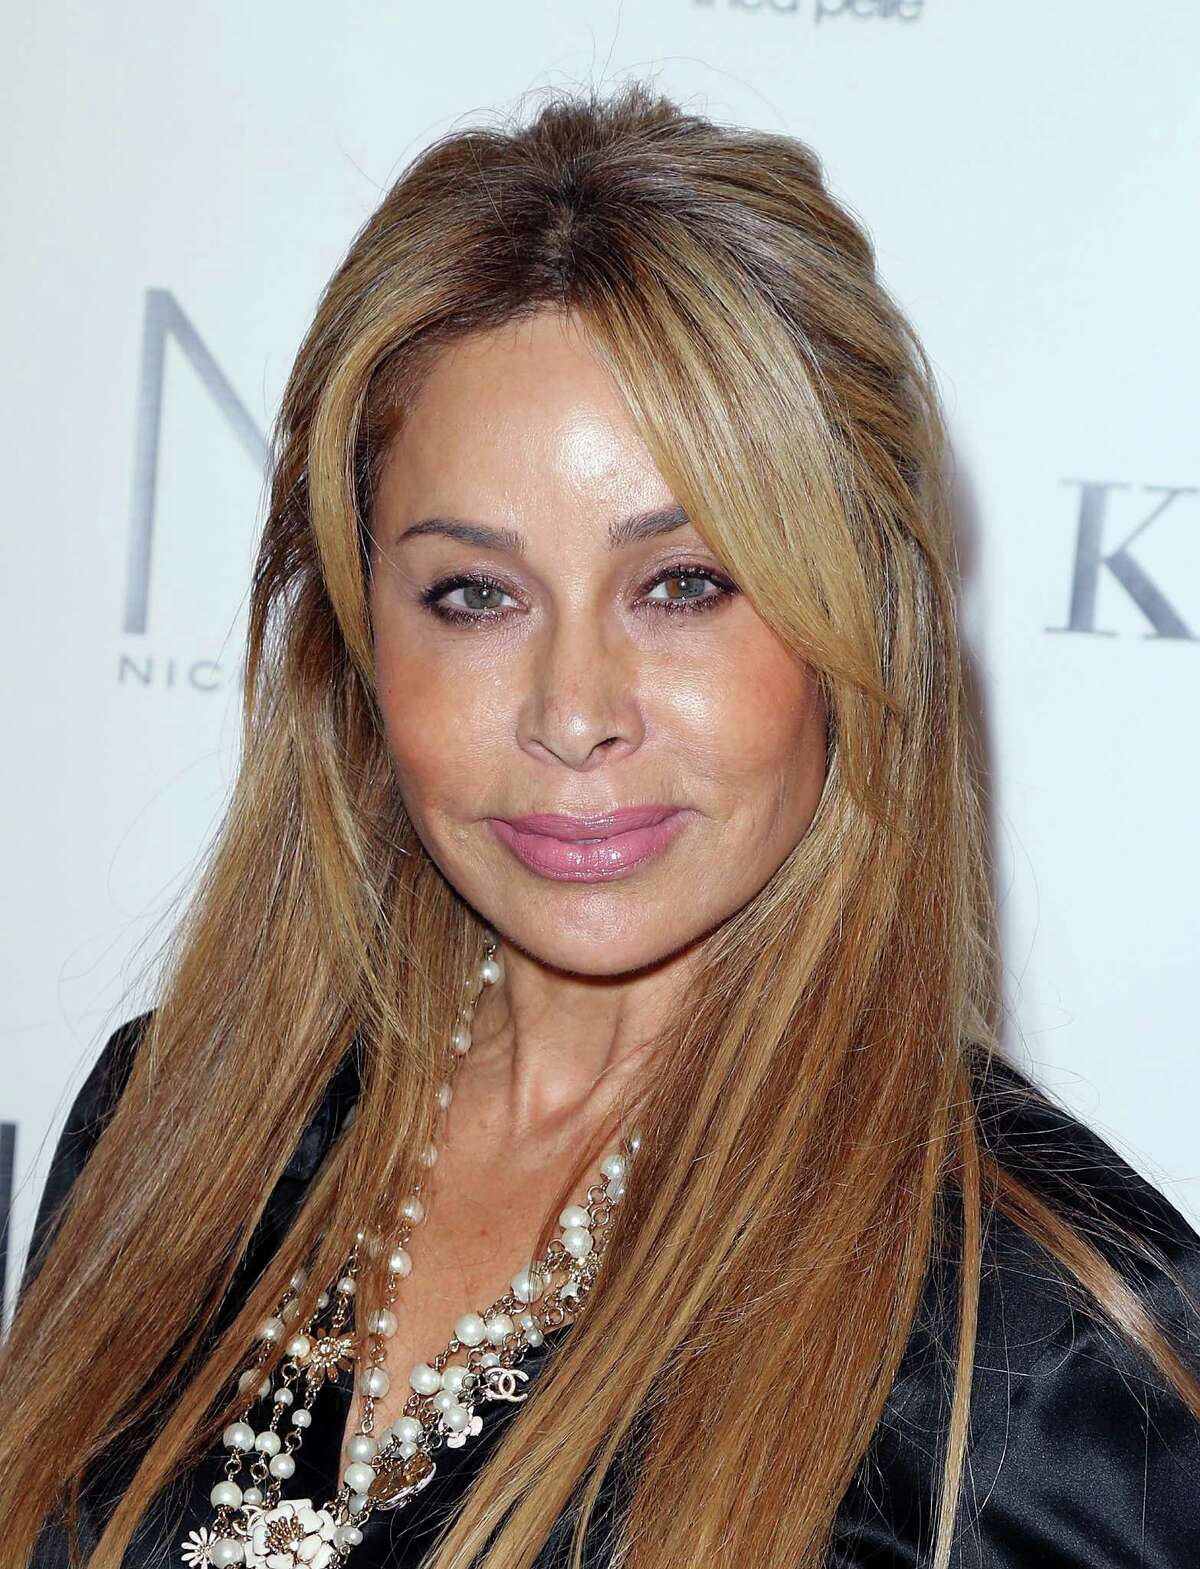 TV personality Faye Resnick attends the Nicky Hilton x Linea Pelle launch celebration at Kyle by Alene Too on Oct. 22, 2015. The "Real Housewives of Beverly Hills" star is selling her Portland, Ore. home for $1.7 million. See the outs and ins of this luxurious estate.